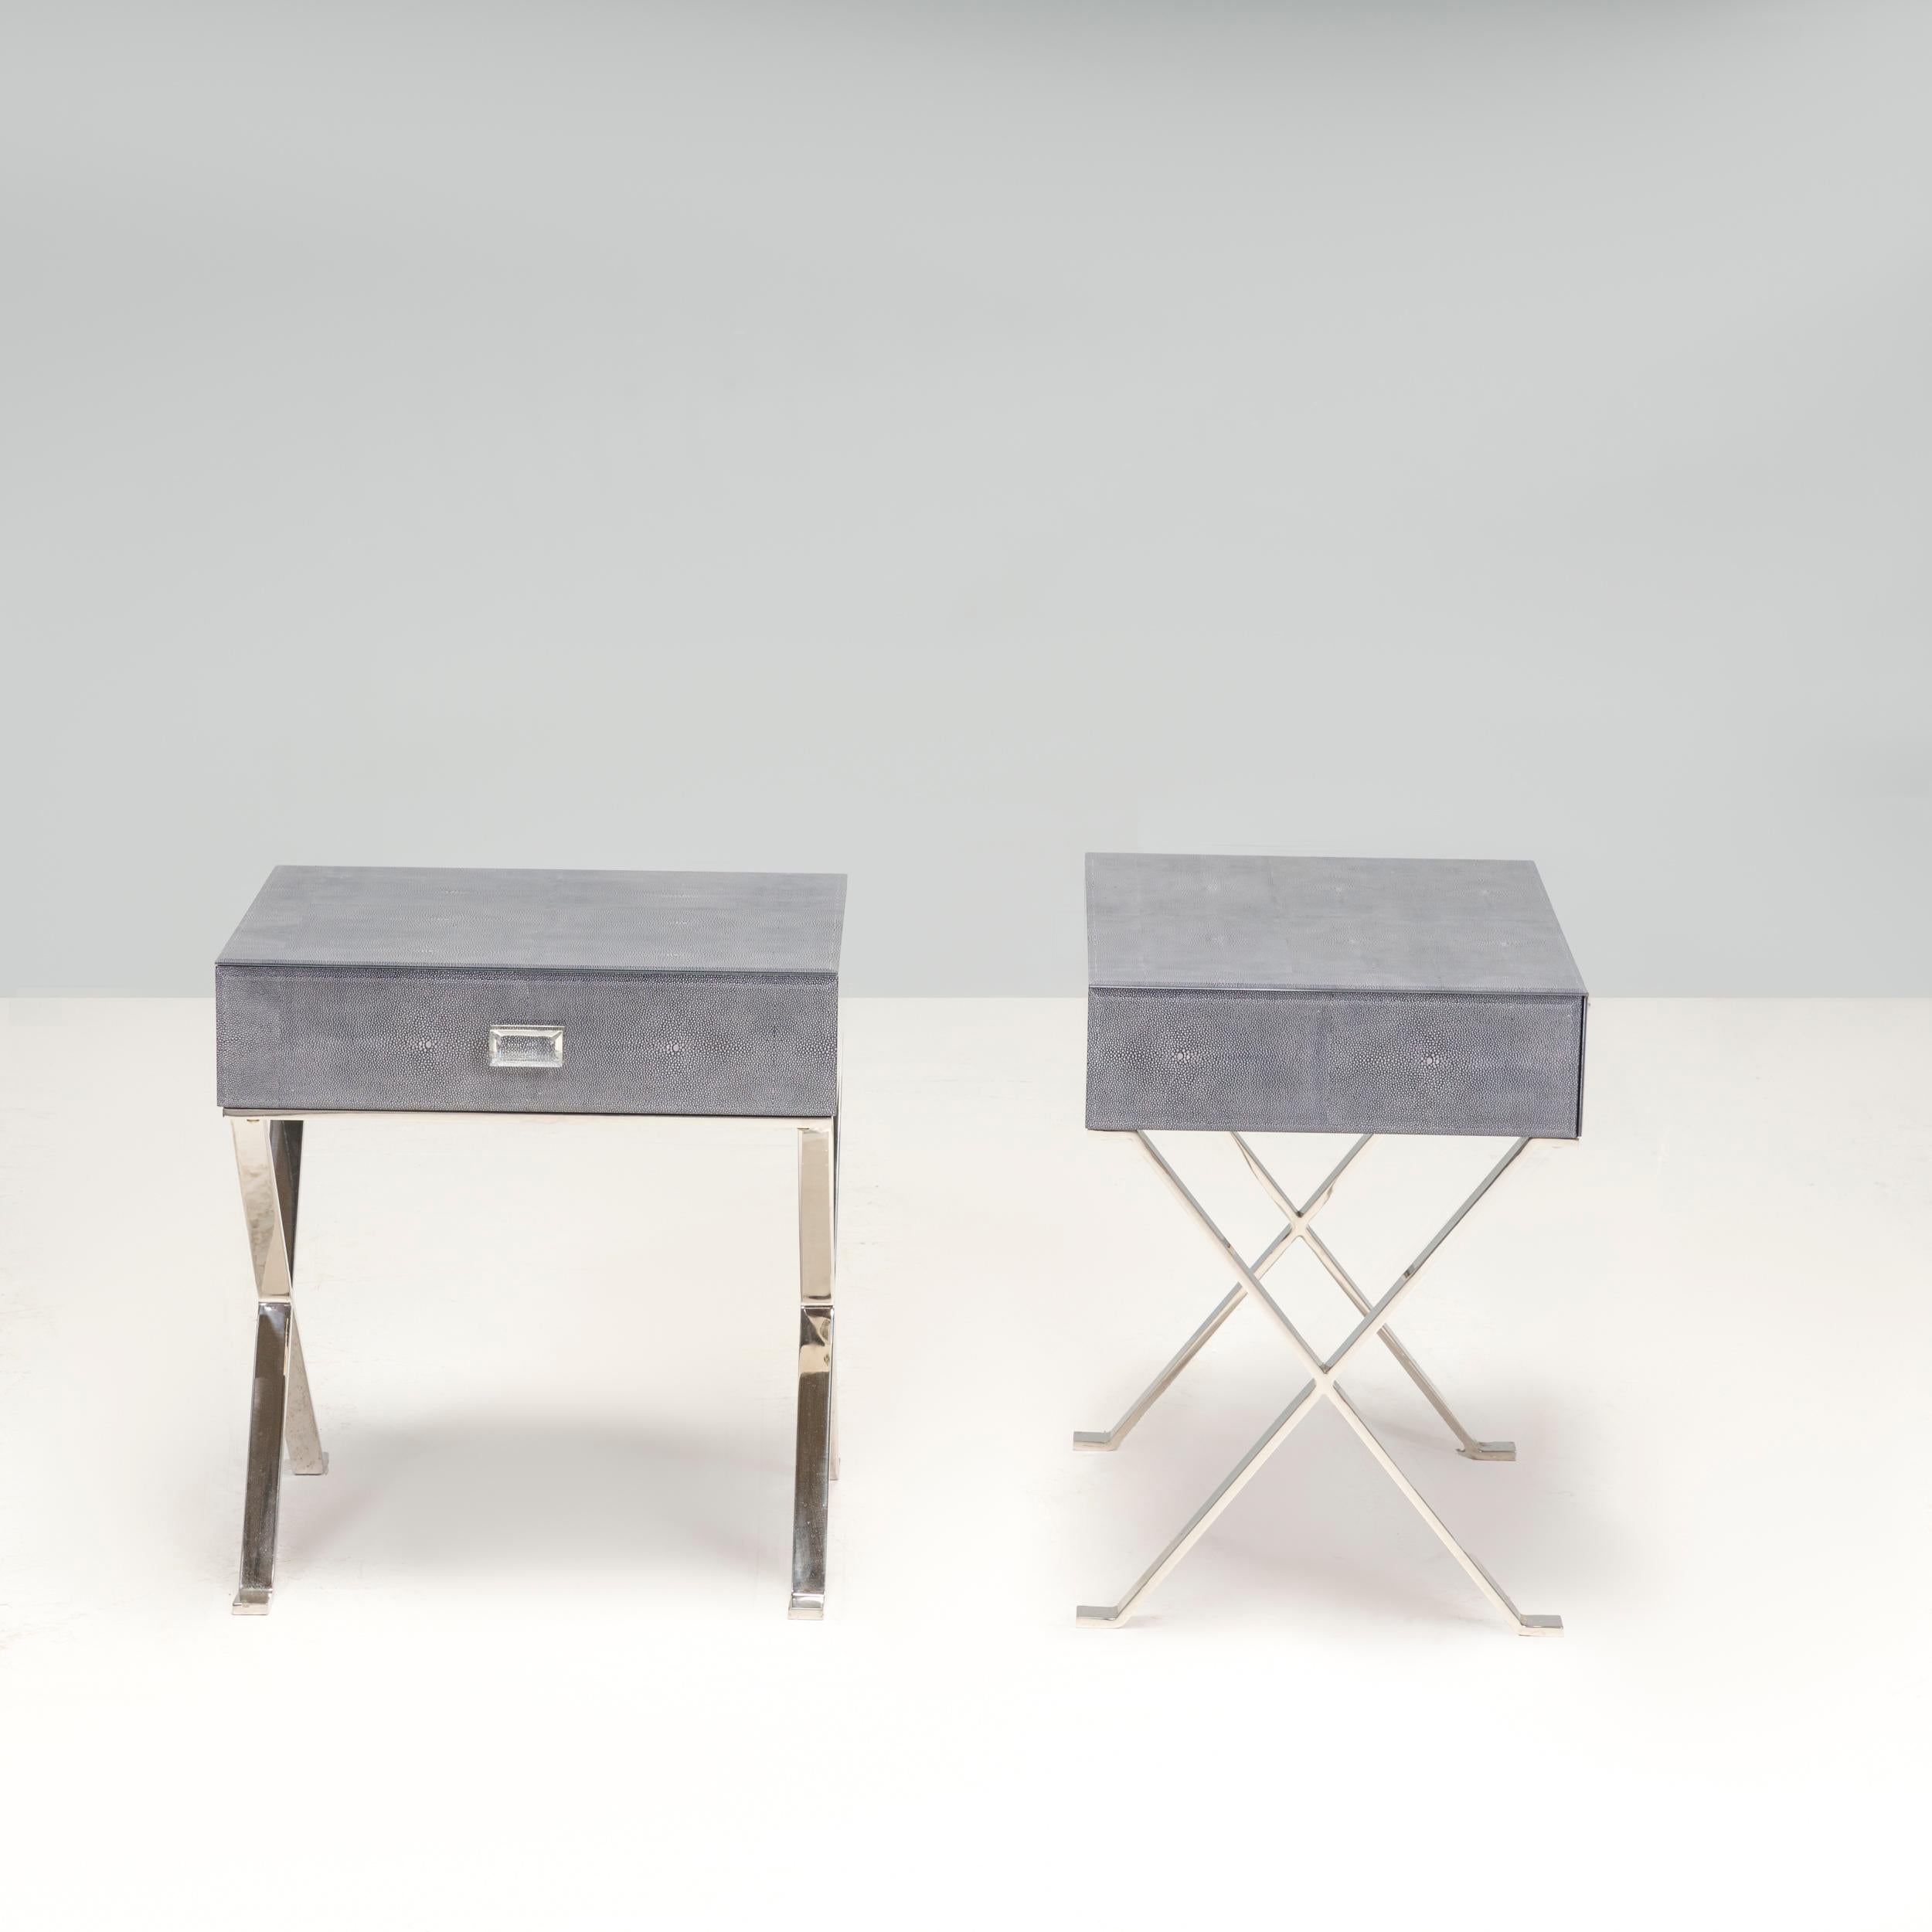 British Shagreen Blue Glass Bedside Tables, Set of Two For Sale